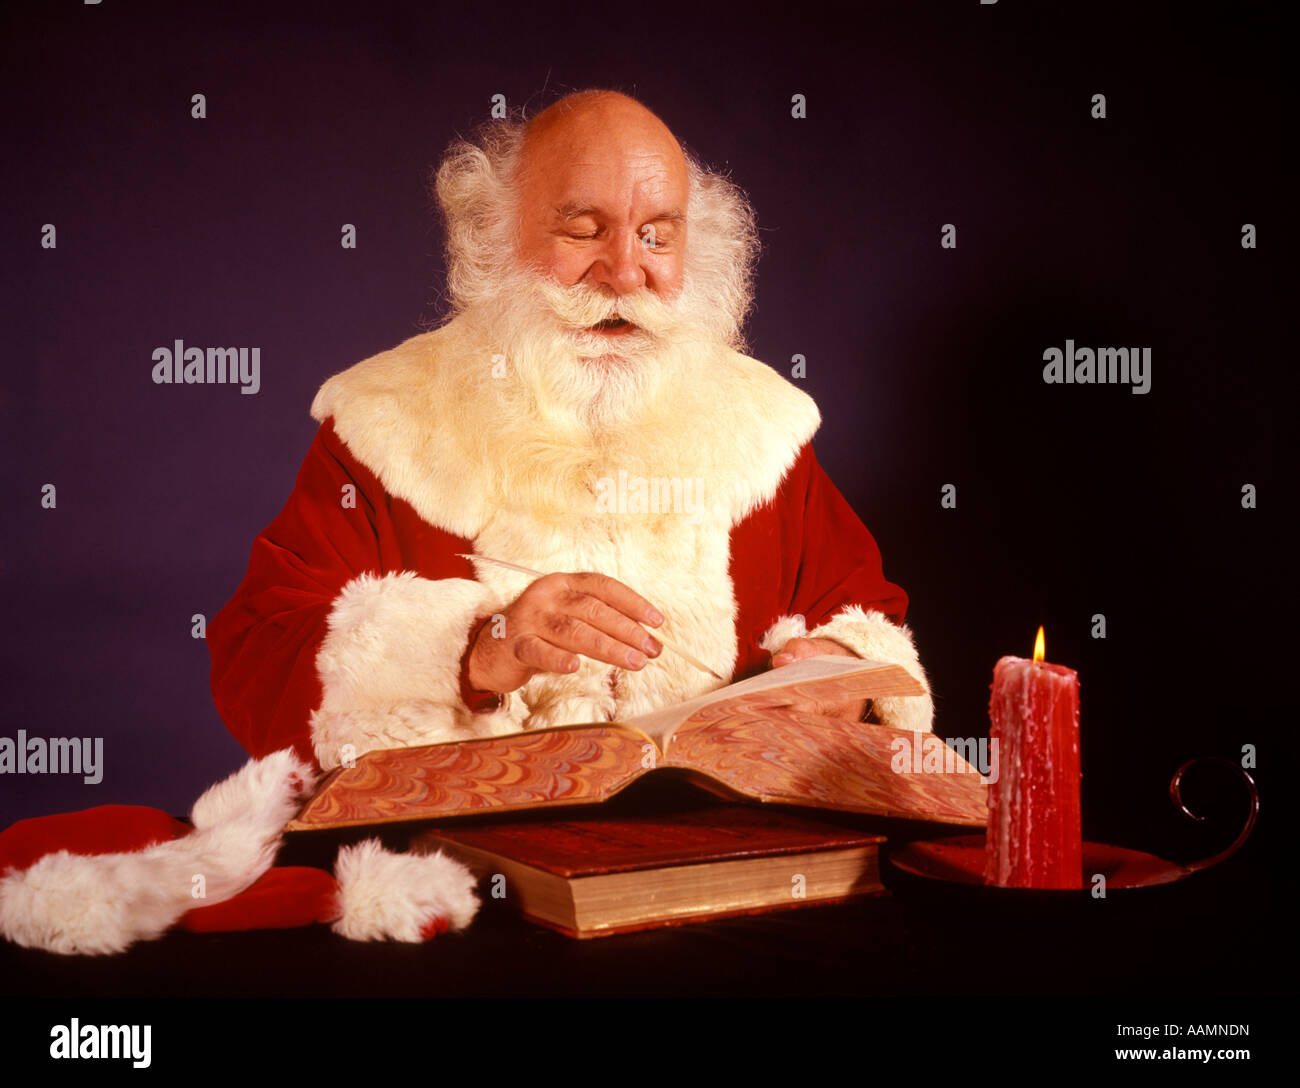 1950s 1960s 1970s BALD SANTA CLAUS WRITING LIST IN BIG BOOK BY CANDLE LIGHT STUDIO INDOOR Stock Photo